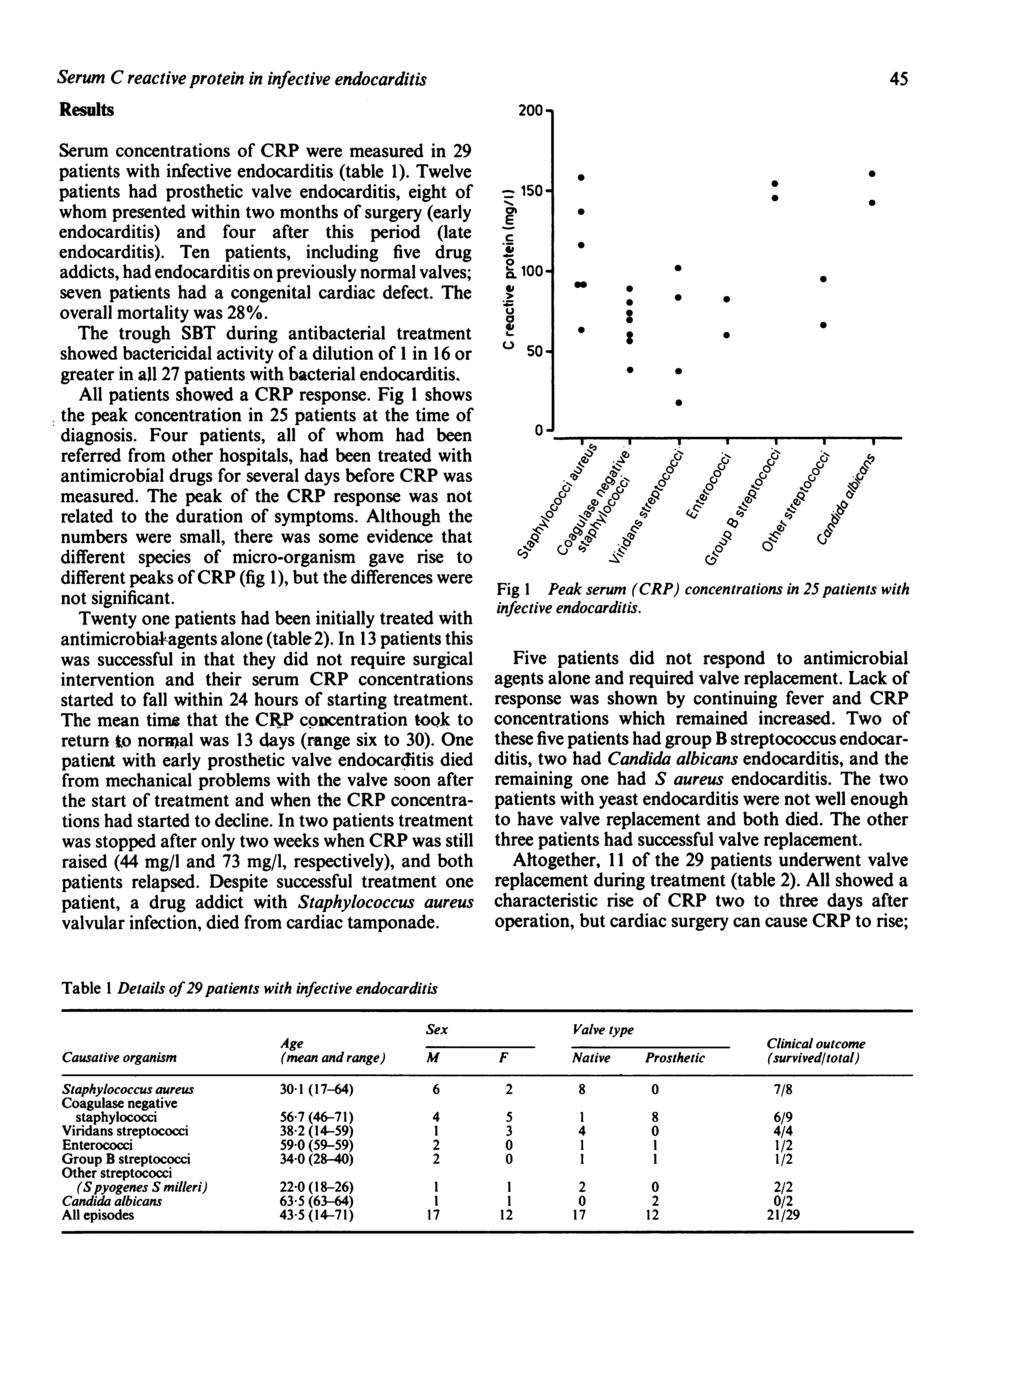 Serum C reactive protein in infective endocarditis Results Serum concentrations of CRP were measured in 29 patients with infective endocarditis (table 1) Twelve patients had prosthetic valve